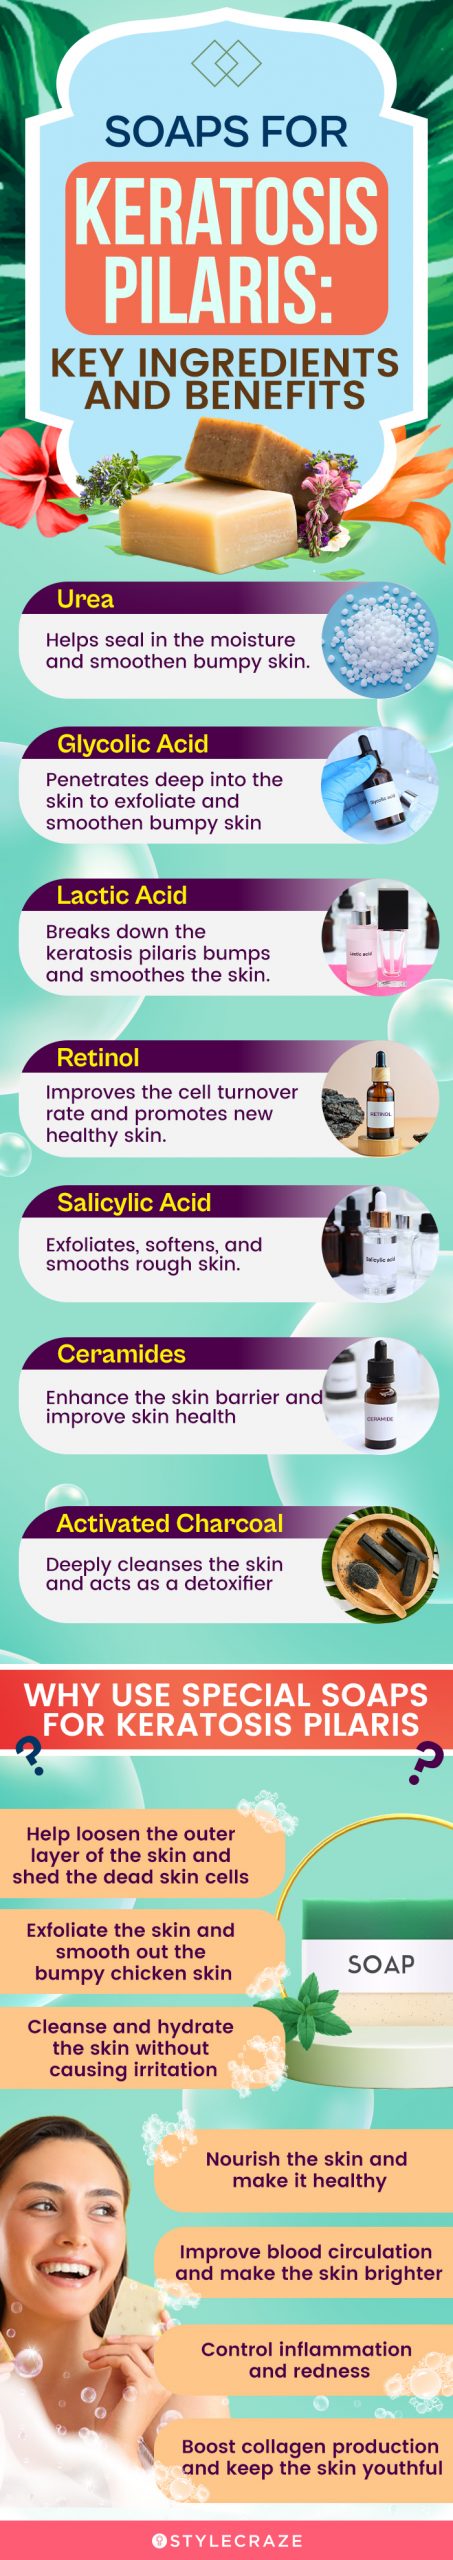 Soaps For Keratosis Pilaris: Key Ingredients And Benefits [infographic]